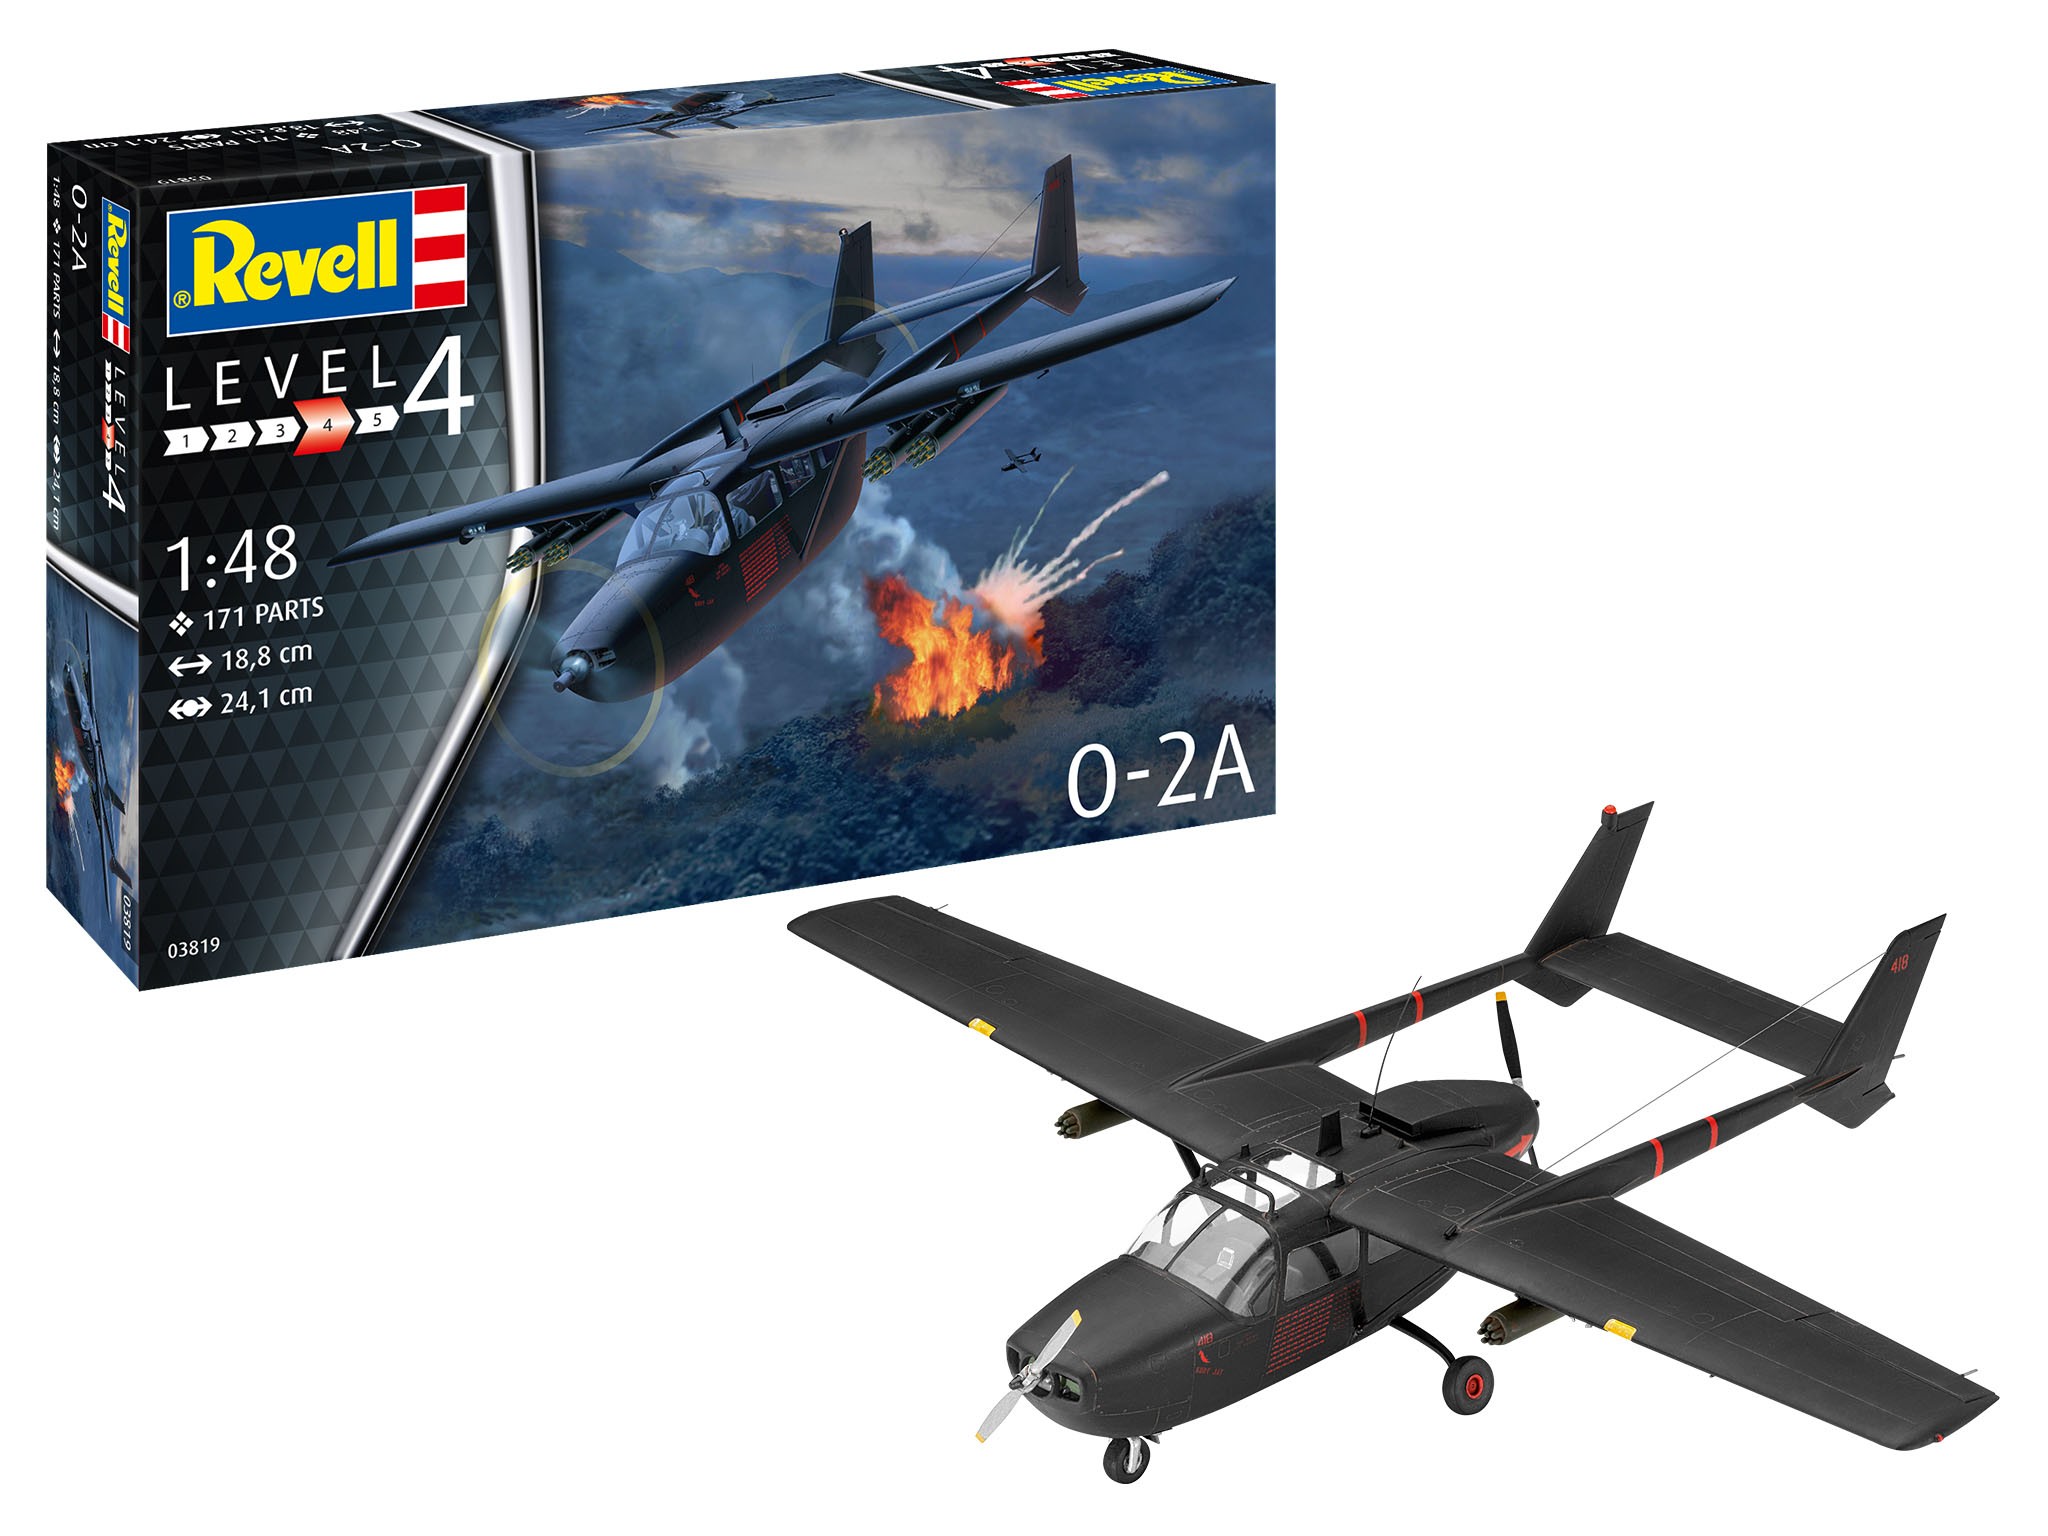 Revell 03819 O-2A  1/48